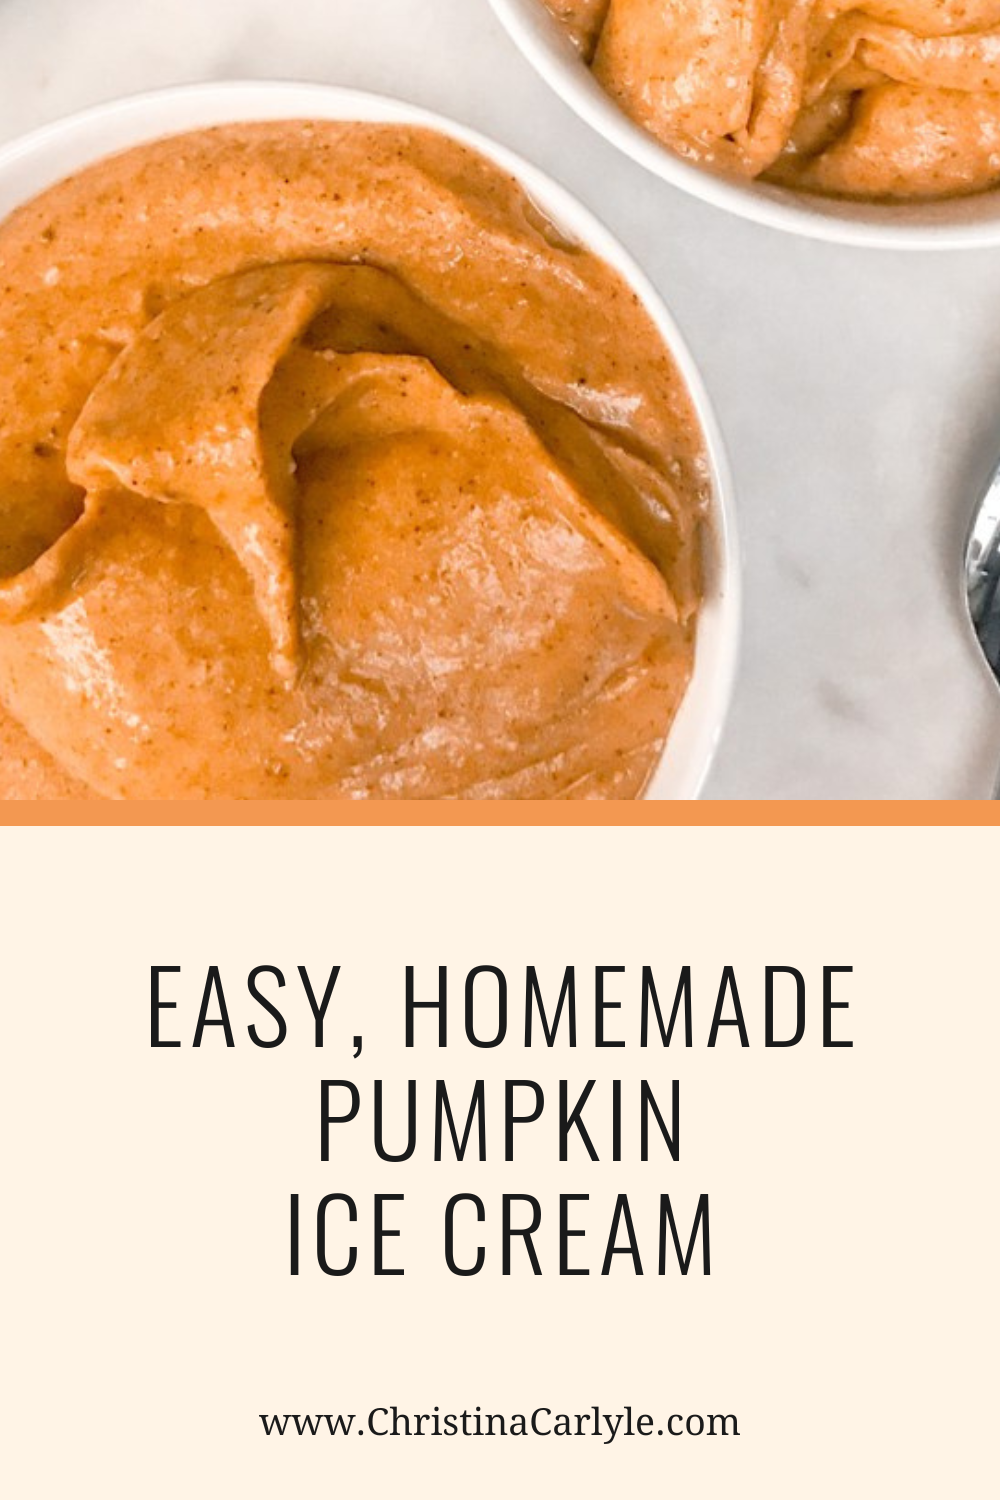 two bowls of Pumpkin Ice Cream and text that says Easy, Homemade Pumpkin Ice Cream